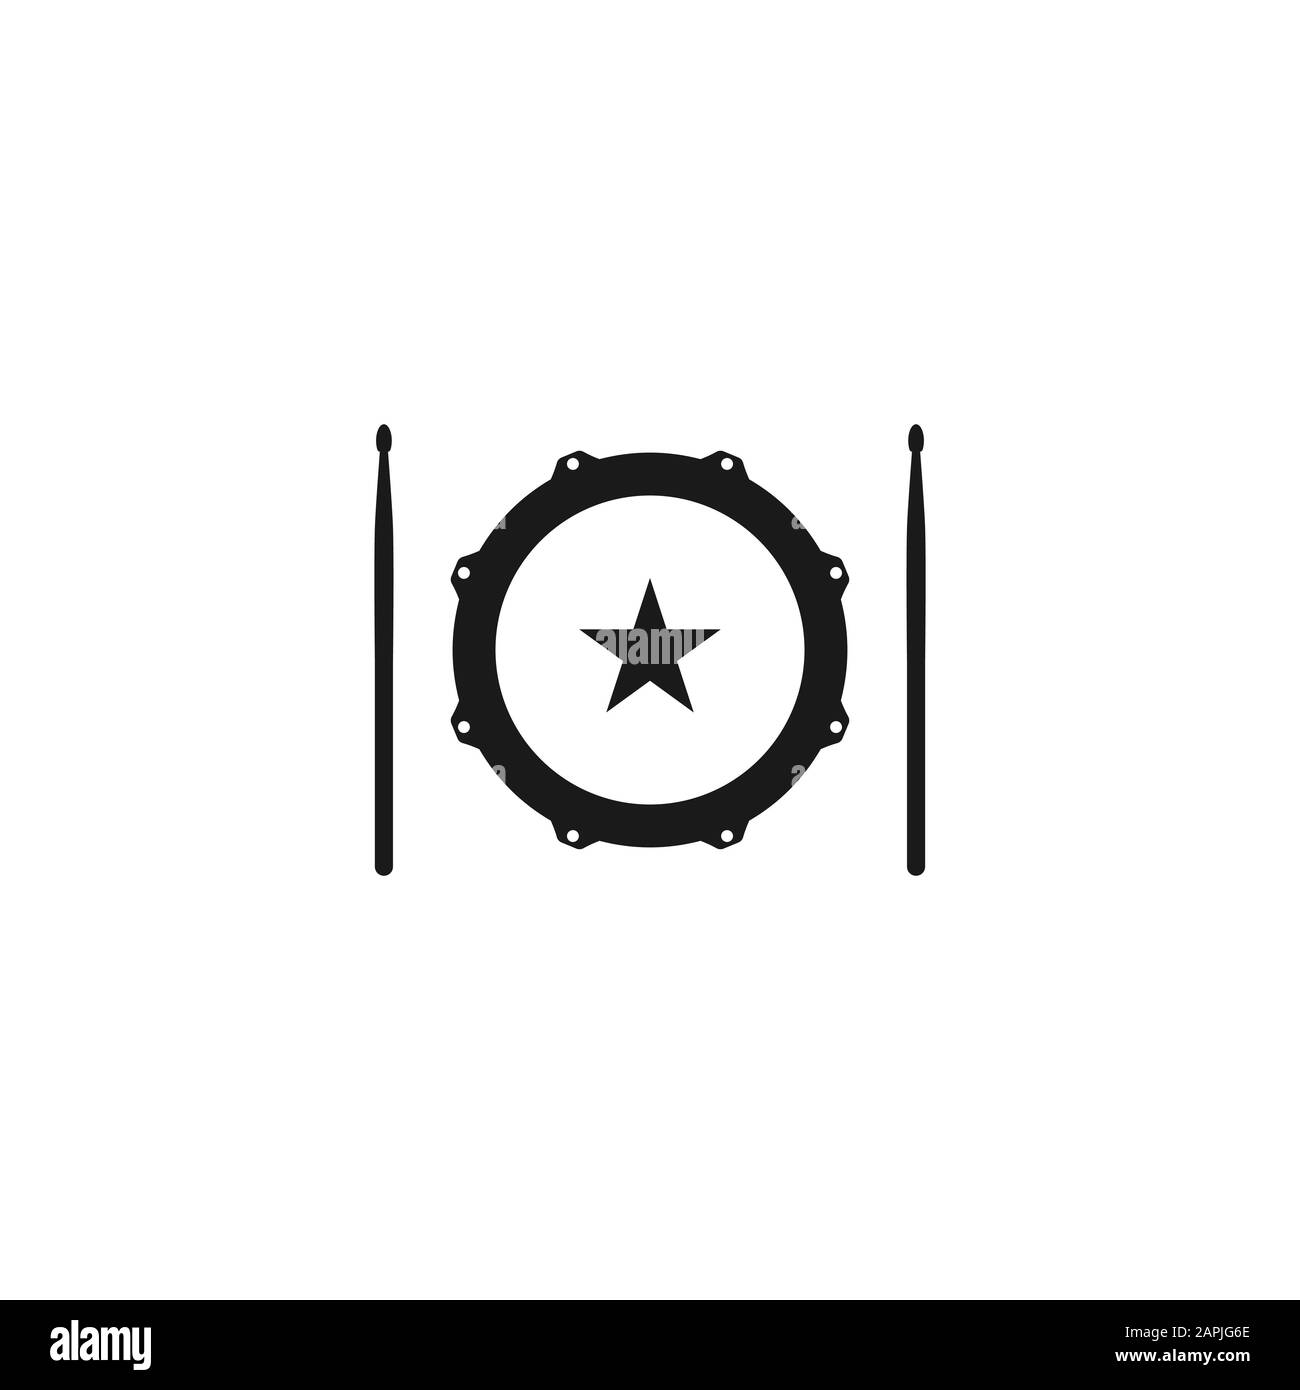 Vector logo of rock school or rock band. Snare drum with drumsticks. Rock music label. Vecor logo isolated on white. Stock Vector